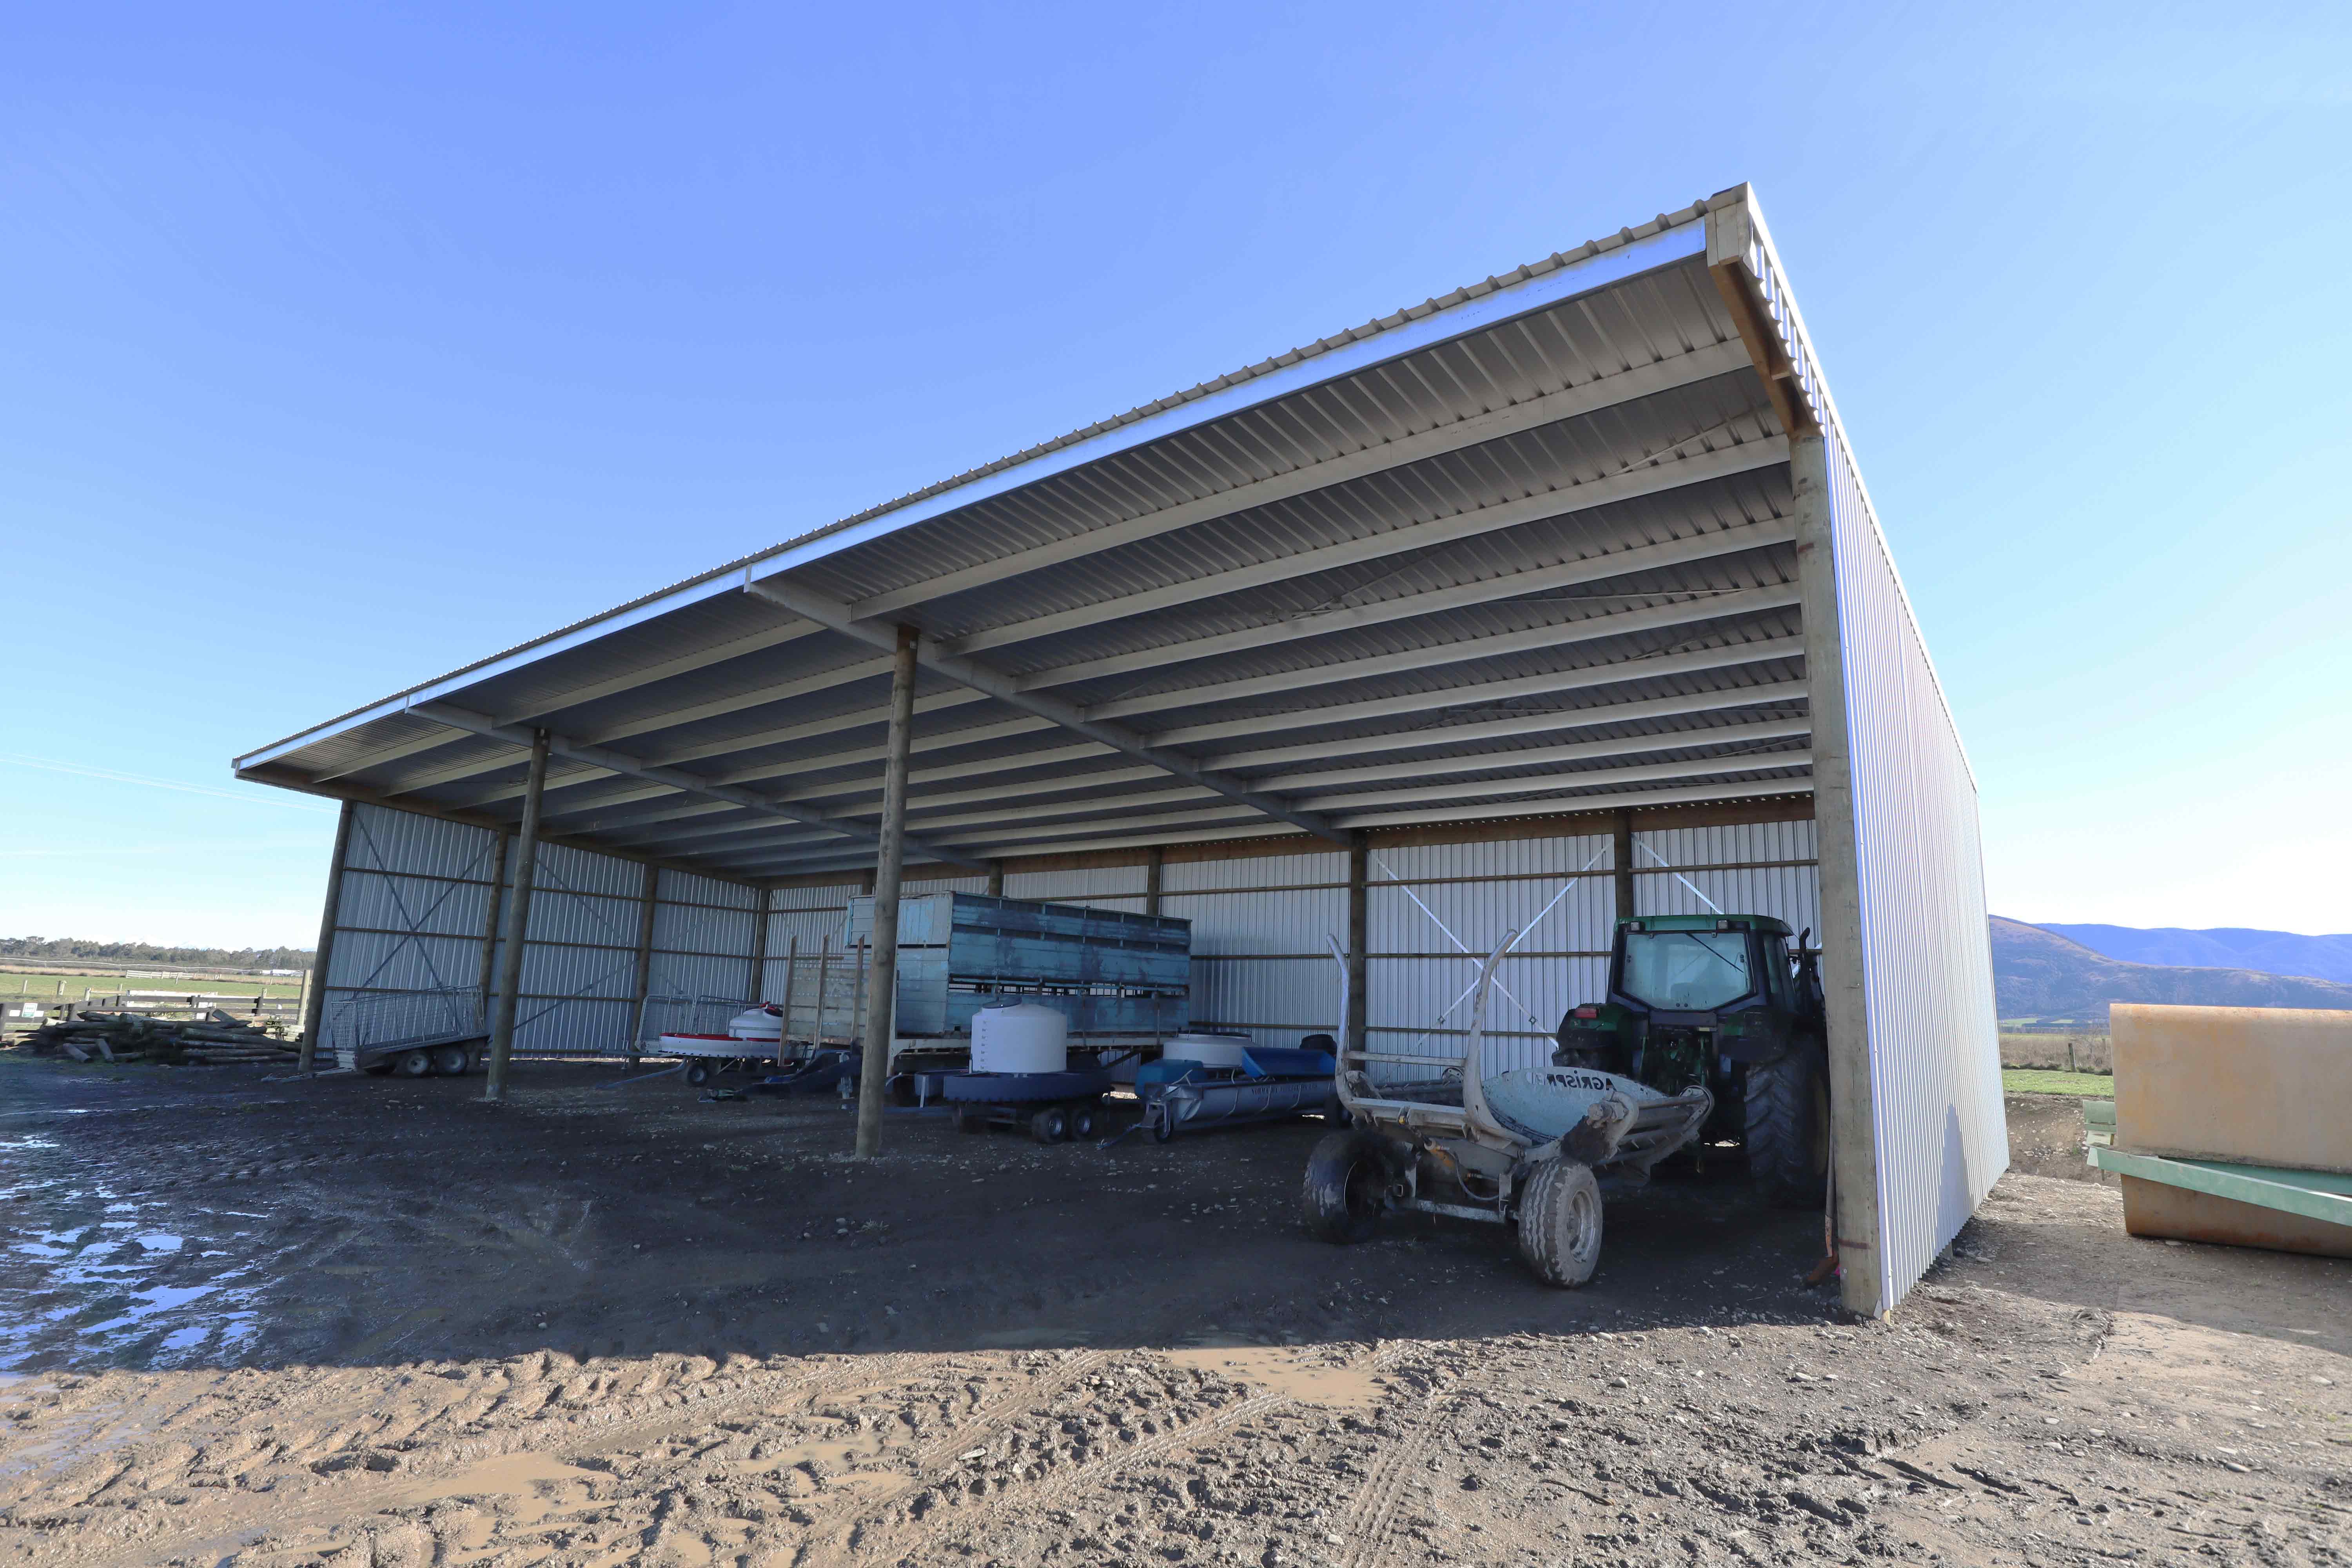 Large implement storage shed